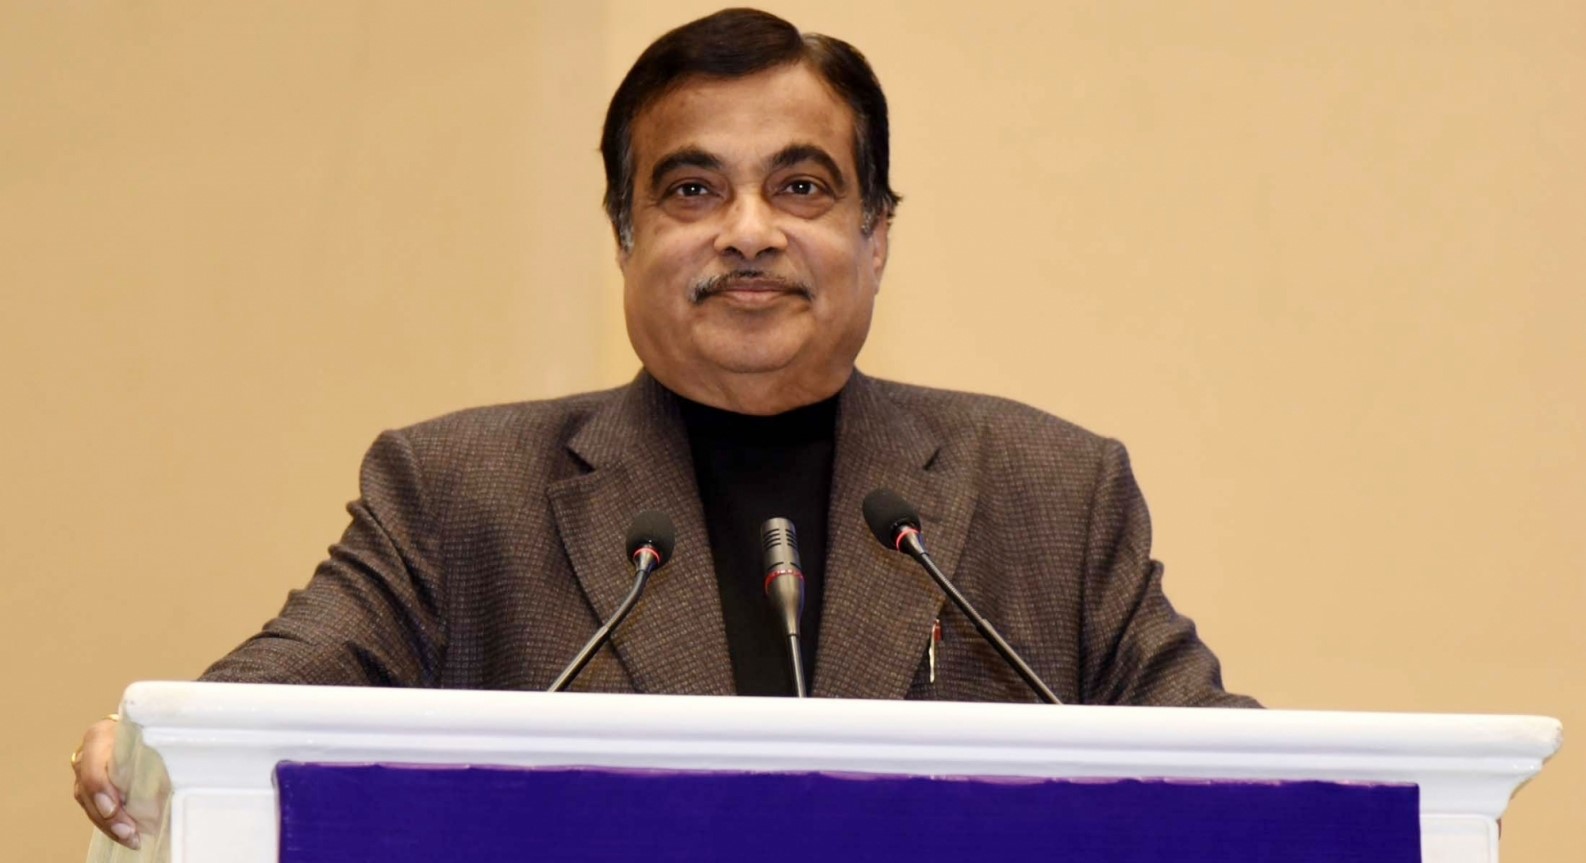 More than Rs 1 lakh crores being spent on building highways in Odisha: Nitin Gadkari